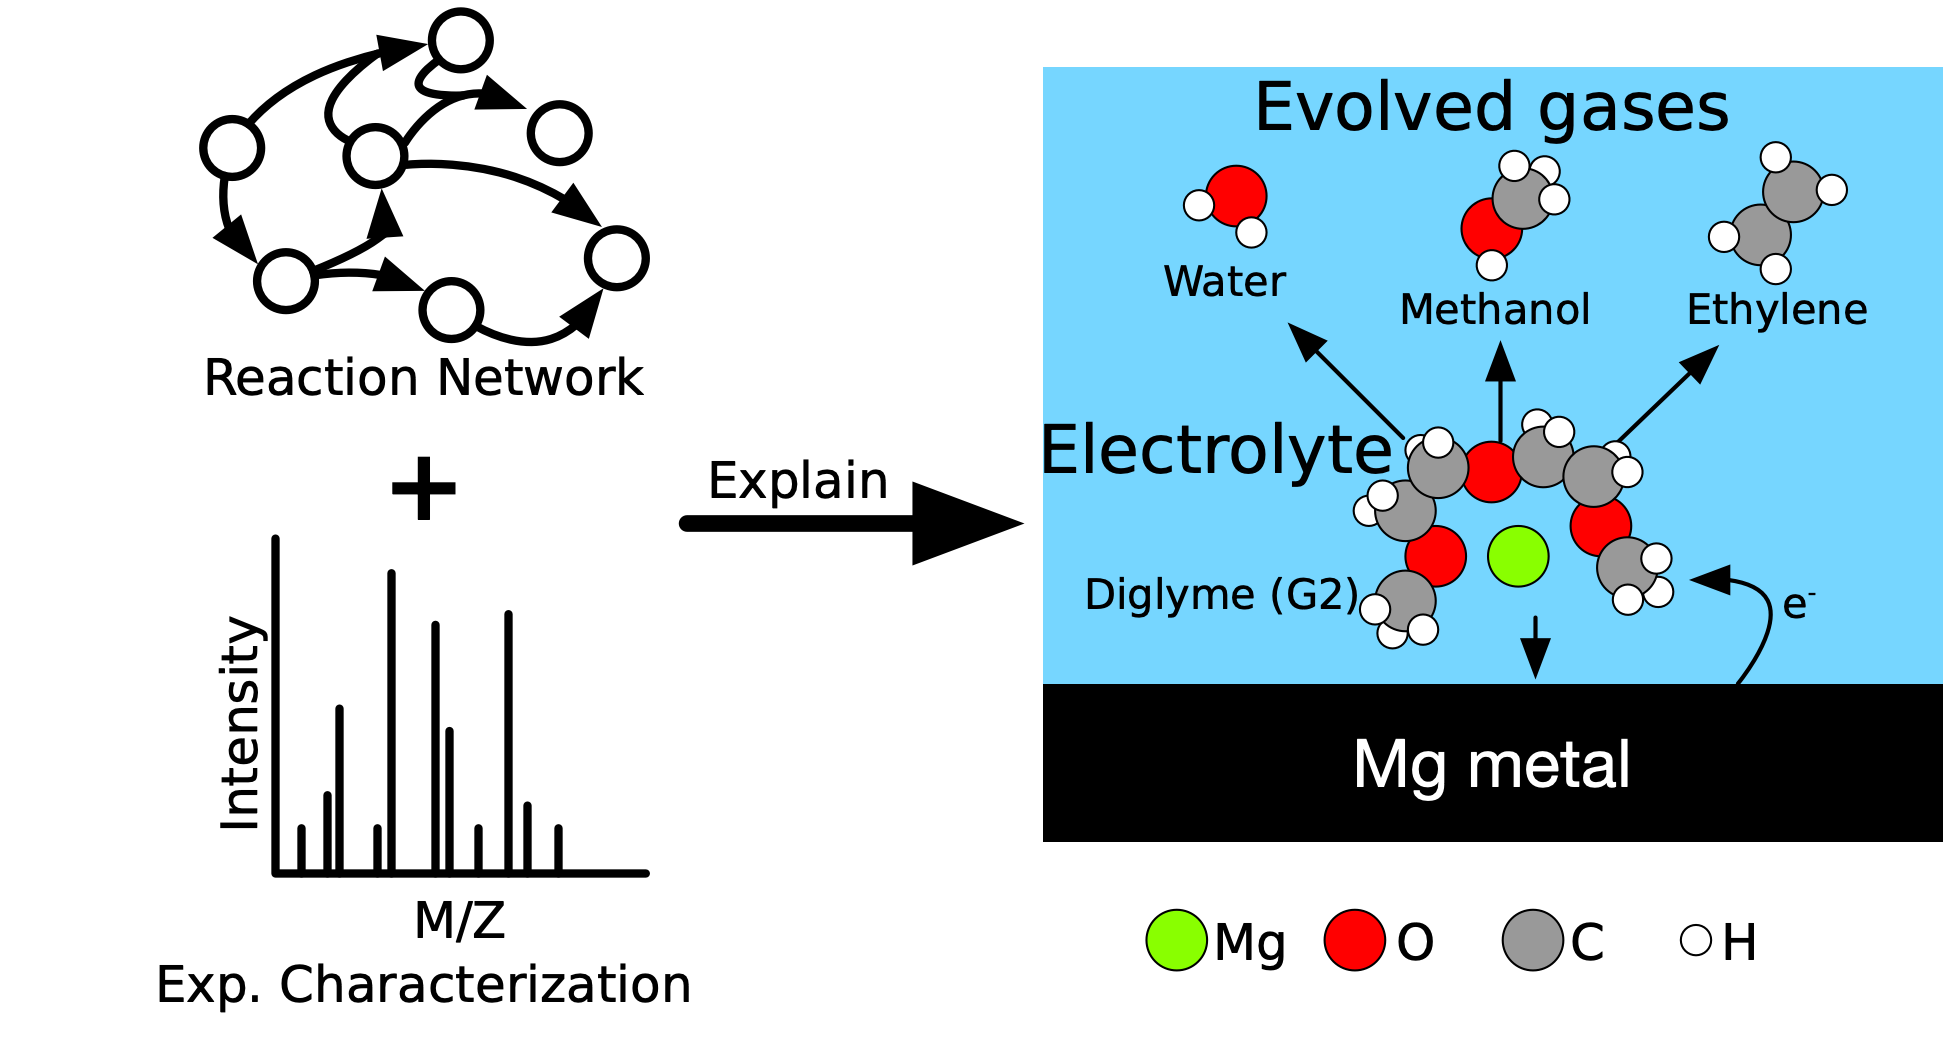 Chemical reaction networks help interpret experimental spectra, explaining gas evolution in Mg-ion batteries